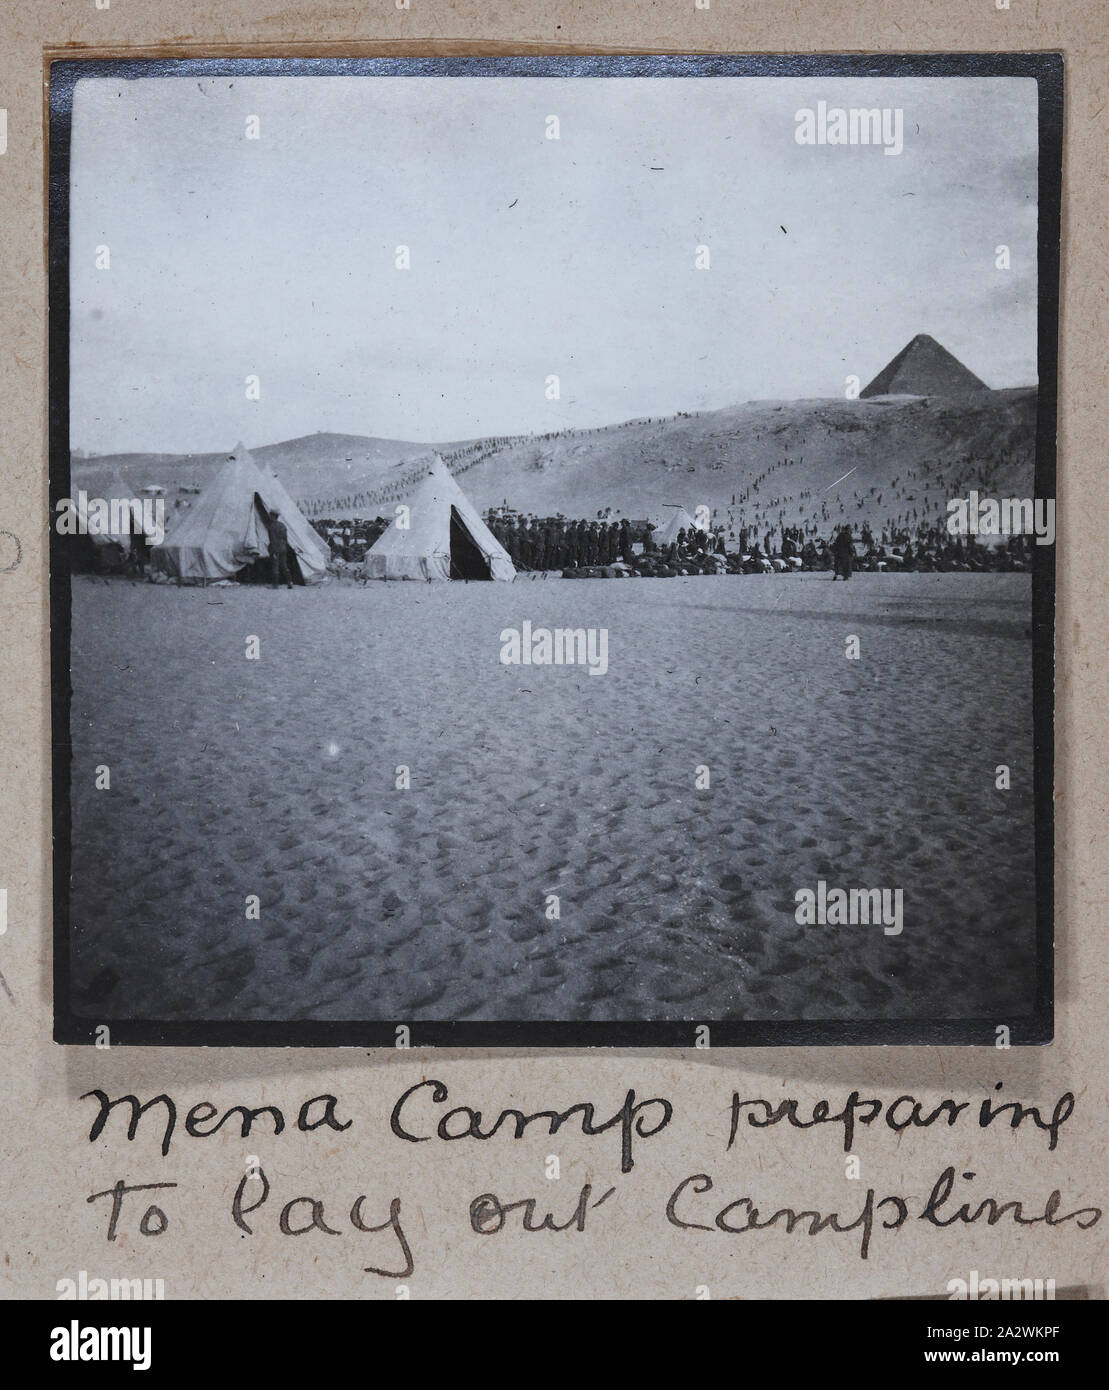 Photographs - 'Mena Camp', Egypt, Captain Edward Albert McKenna, World War I, 1914-1915, One of 139 photographs in an album from World War I likely to have been taken by Captain Edward Albert McKenna. The photographs include the 7th Battalion training in Mena Camp, Egypt, and sight-seeing. Image depicting the laying out of the camplines around Mena Camp, Egypt. Mena Camp was one of three training camps in Egypt that were used by the A.I.F. and the N.Z.E.F Stock Photo